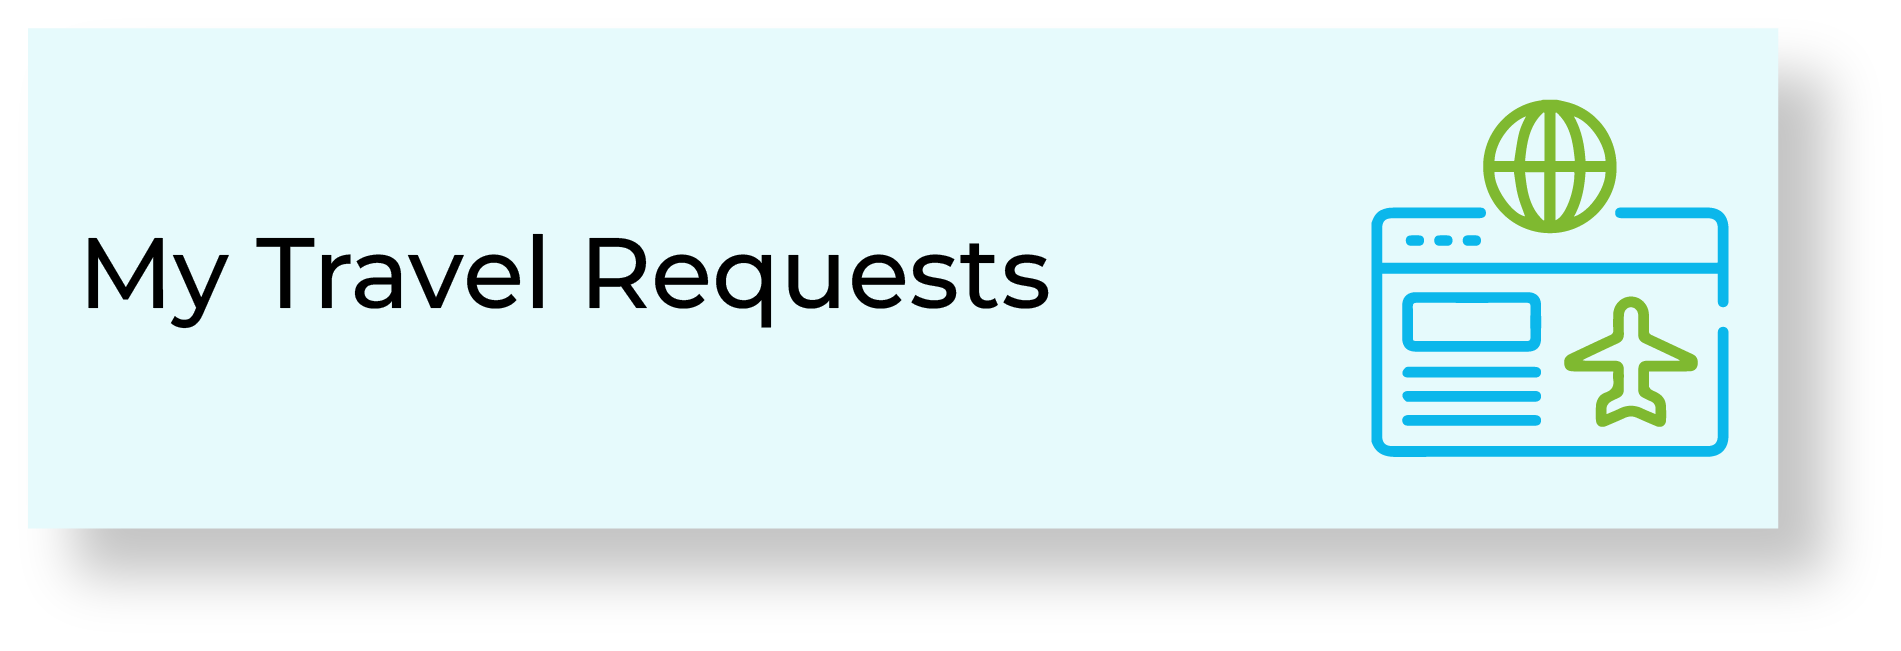 My Travel Requests